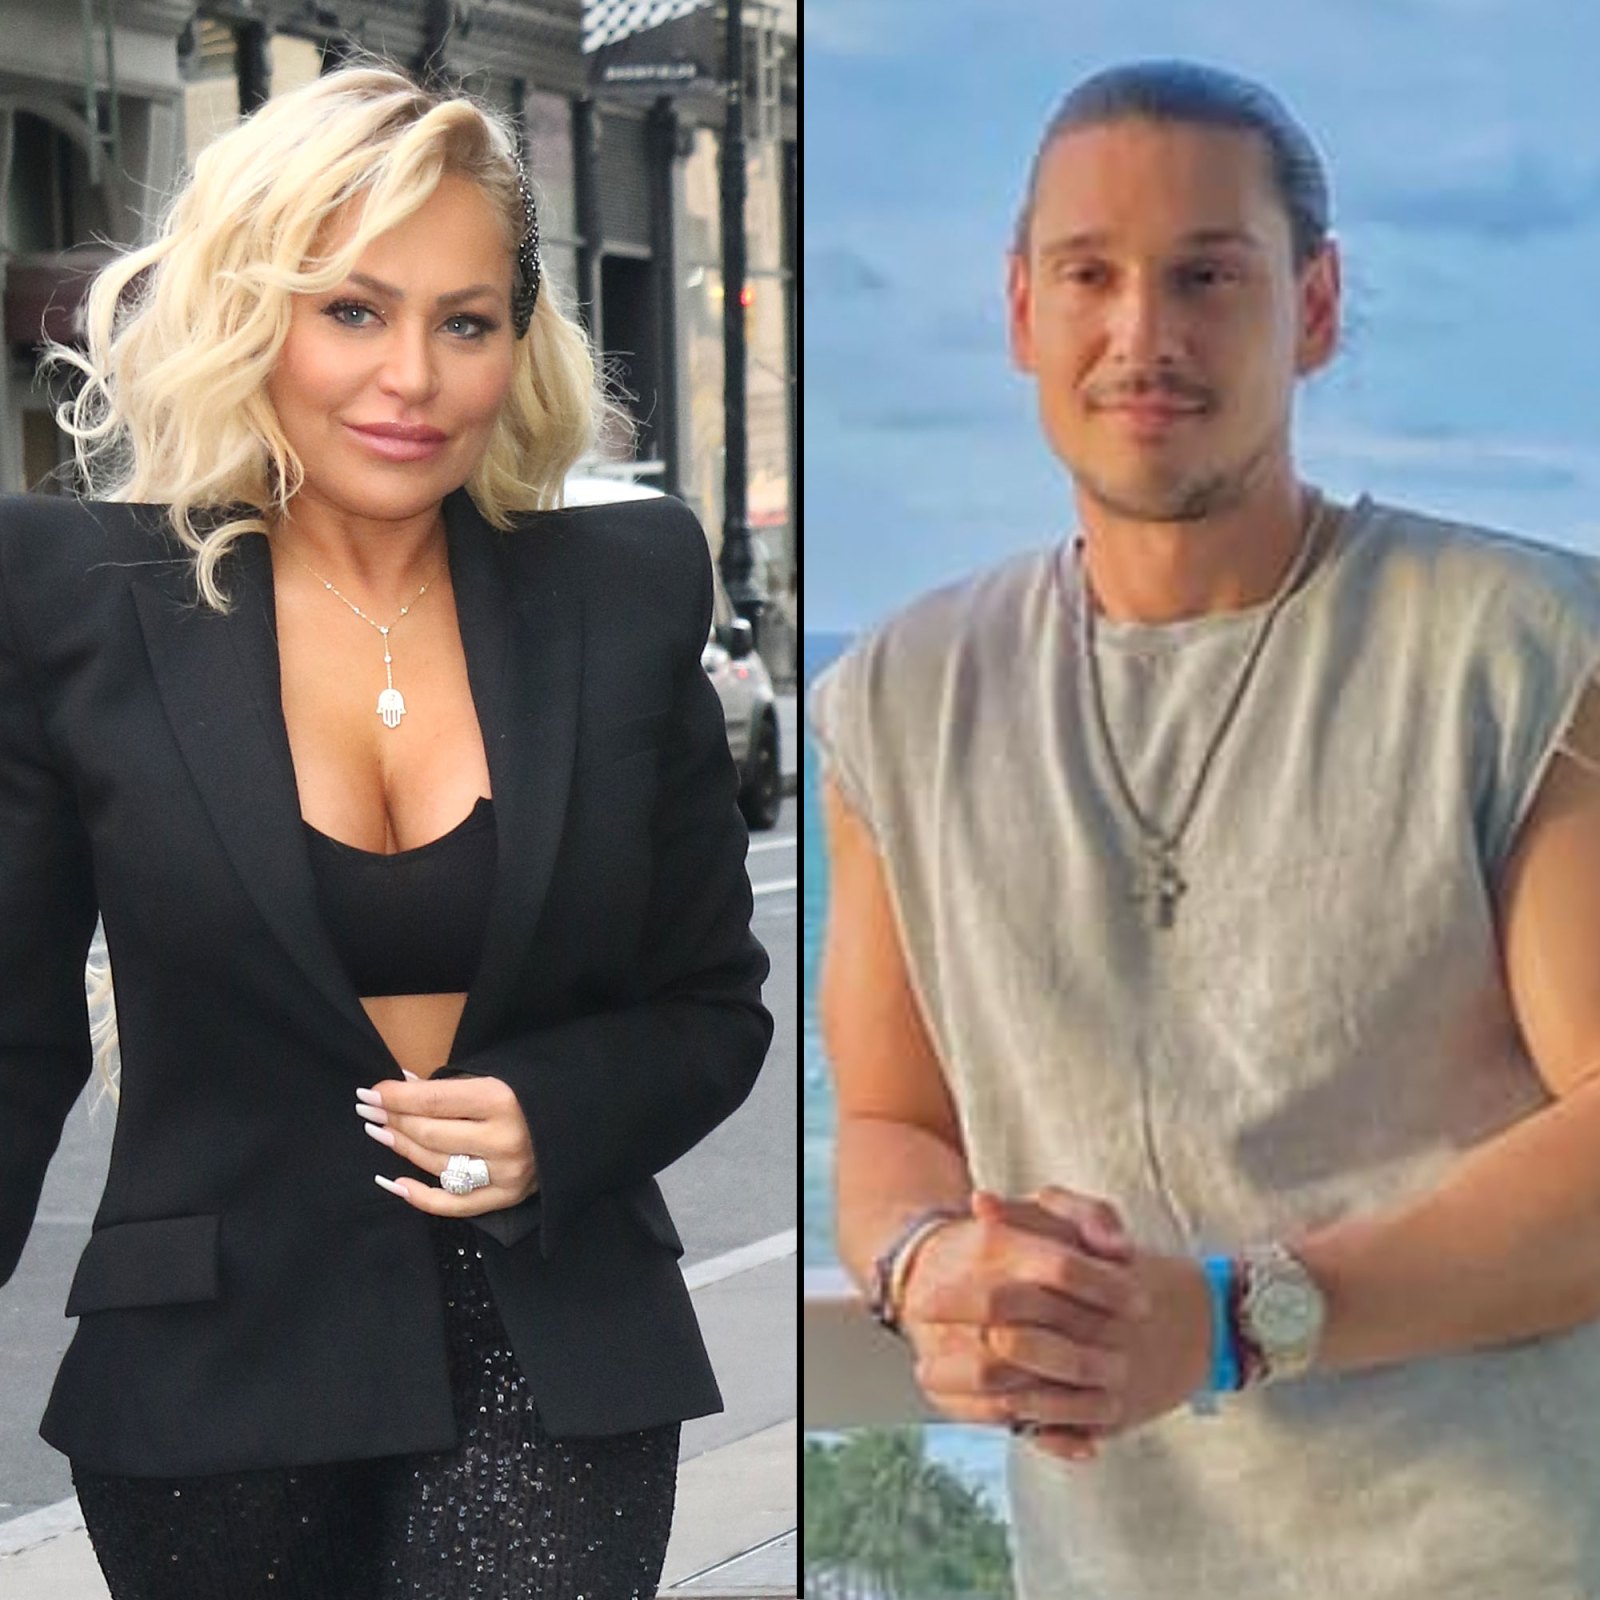 Darcey Silva Is ‘Ready’ to Date Again After Rusev Split